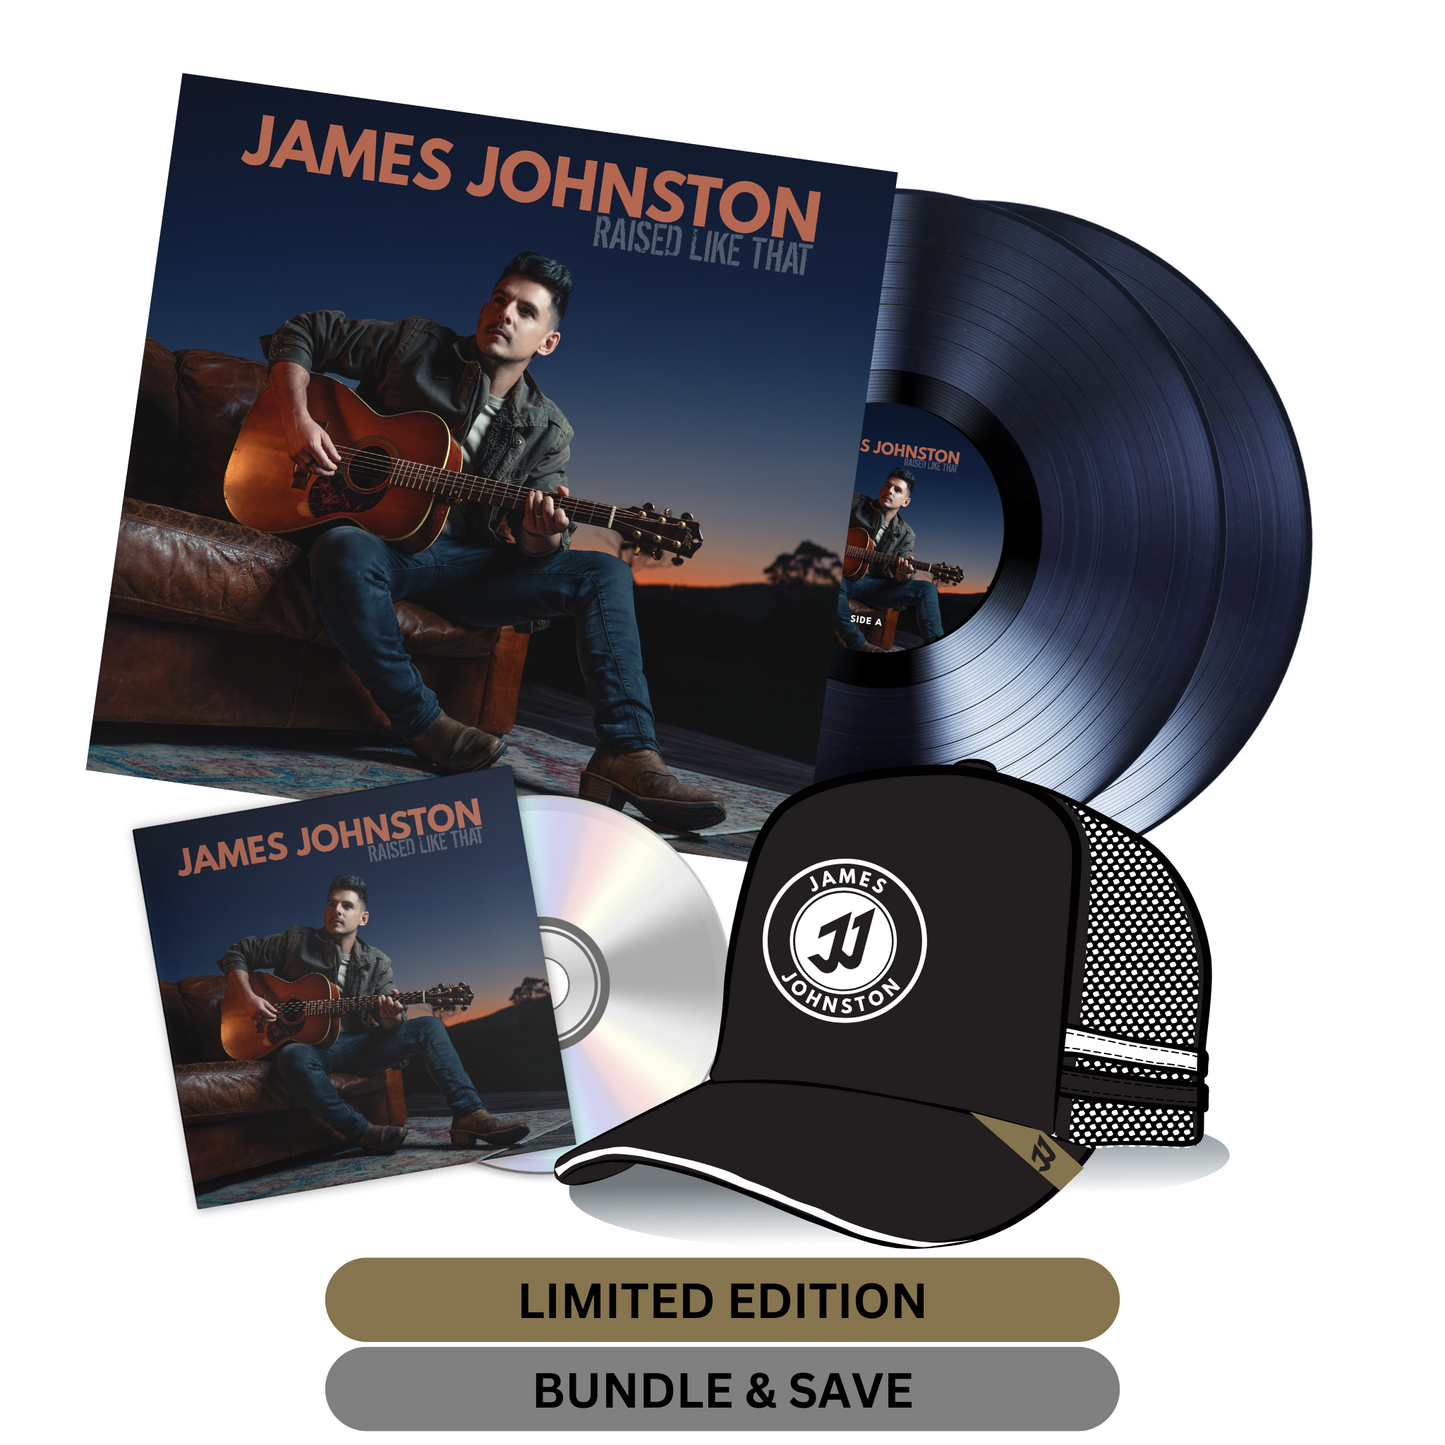 (Signed) RAISED LIKE THAT - Limited Edition Collectors Bundle